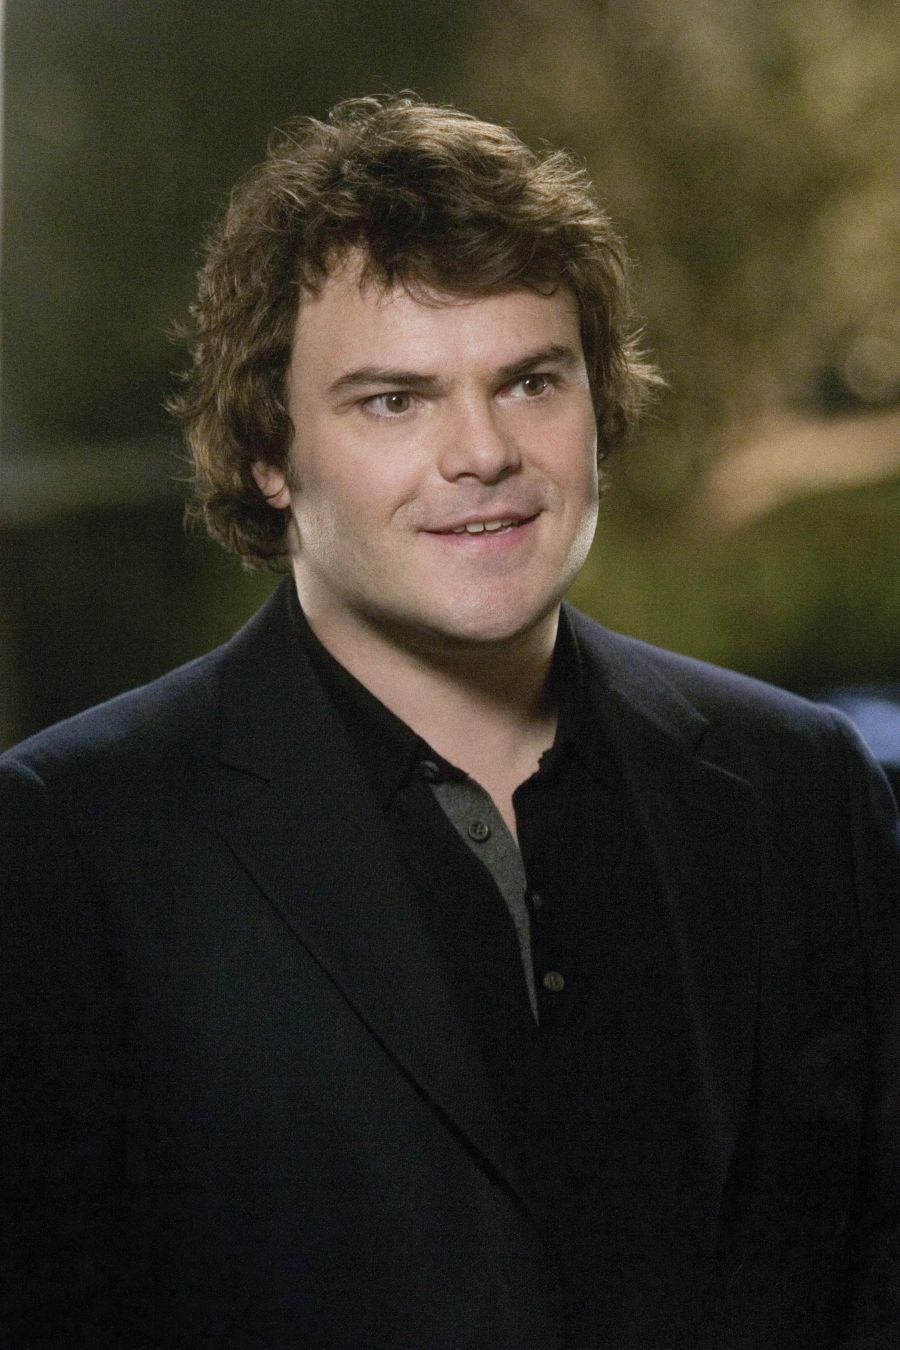 Jack Black as Miles in Sony Pictures' The Holiday (2006)